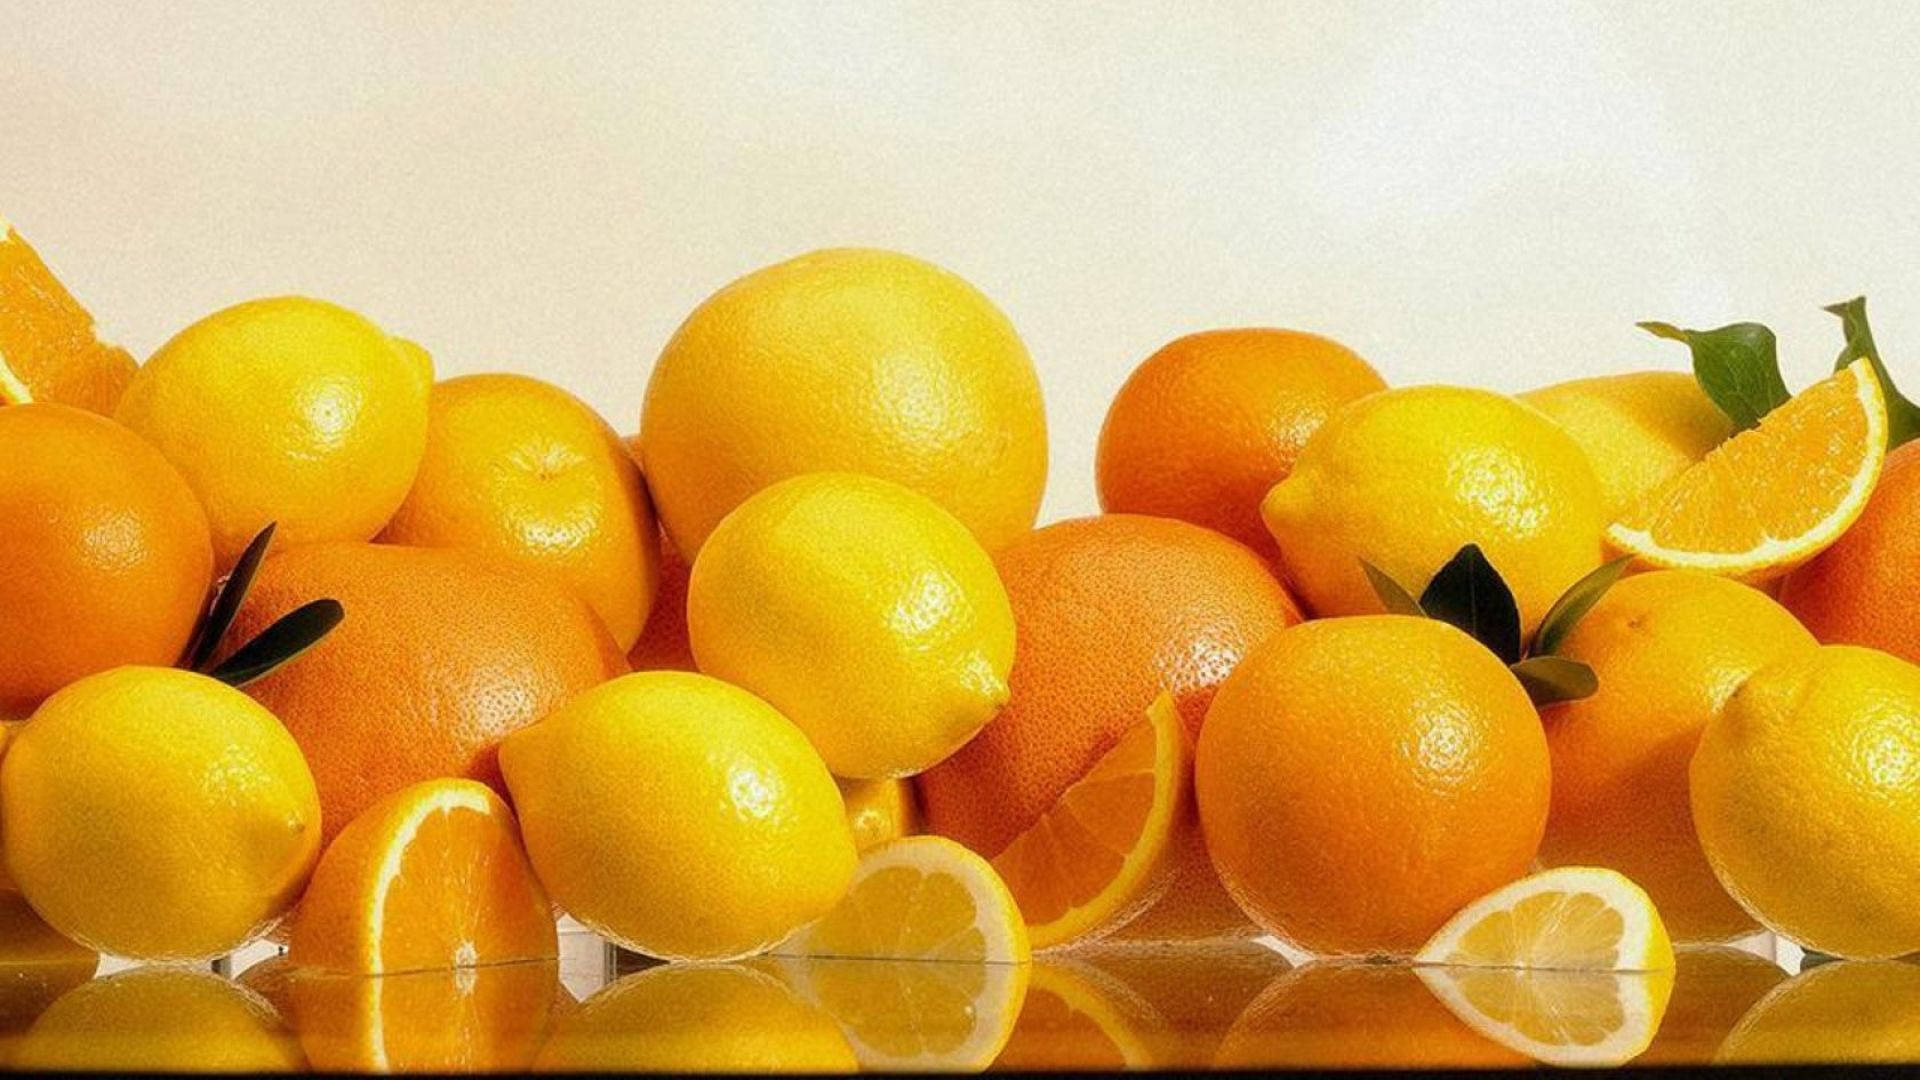 Orange Fruits On The Table